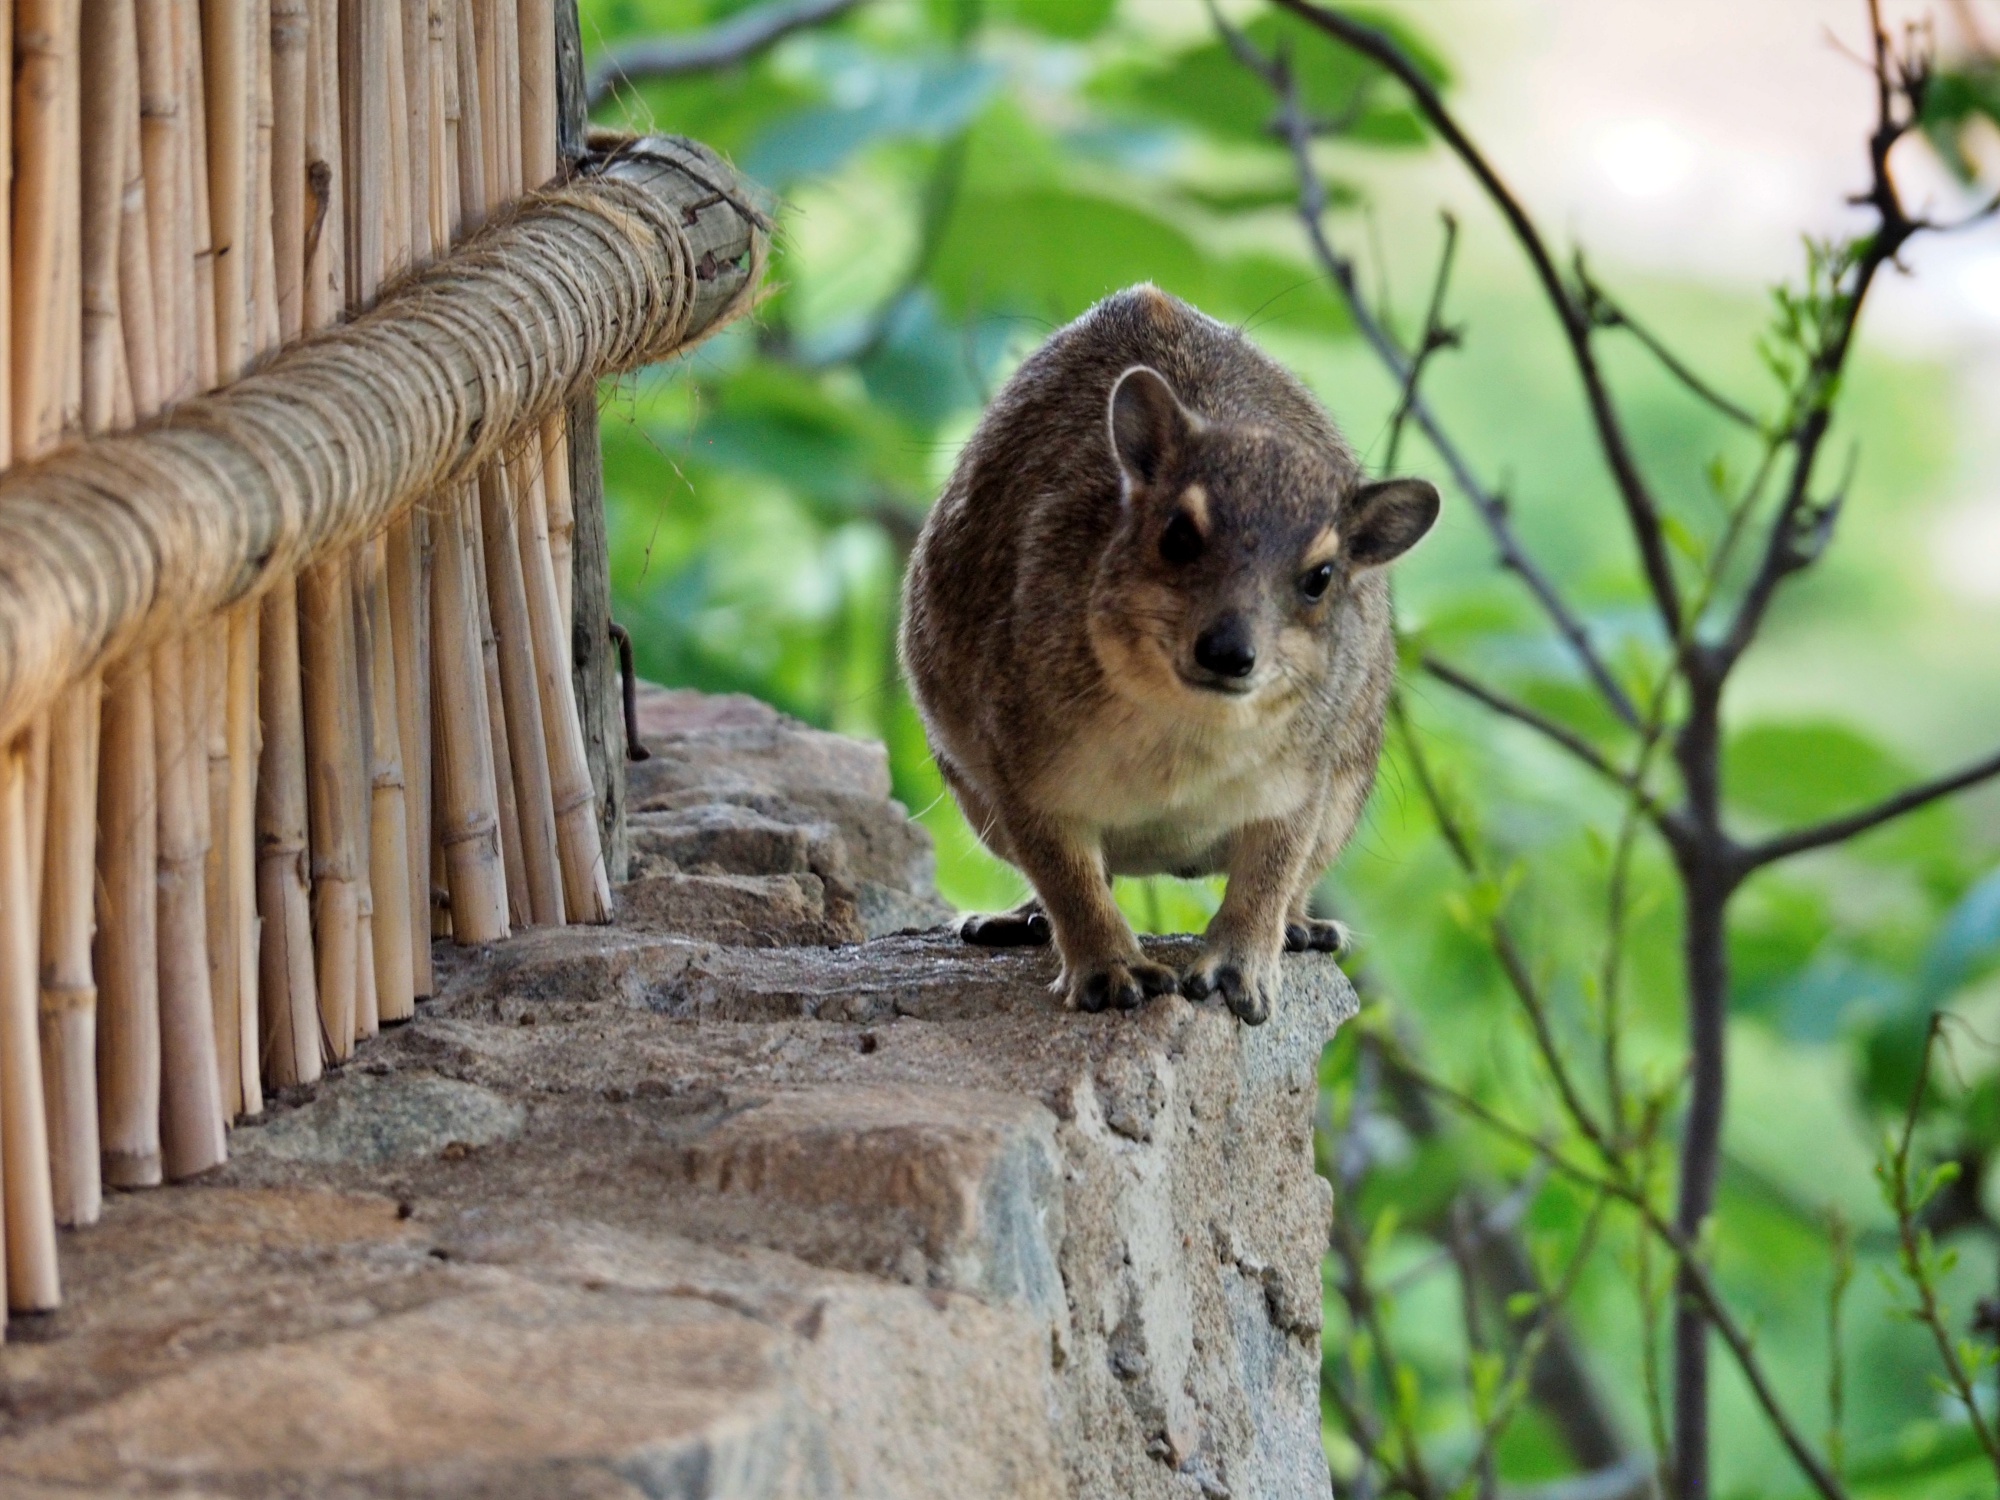 Another winning Scrabble word - the Rock Hyrax